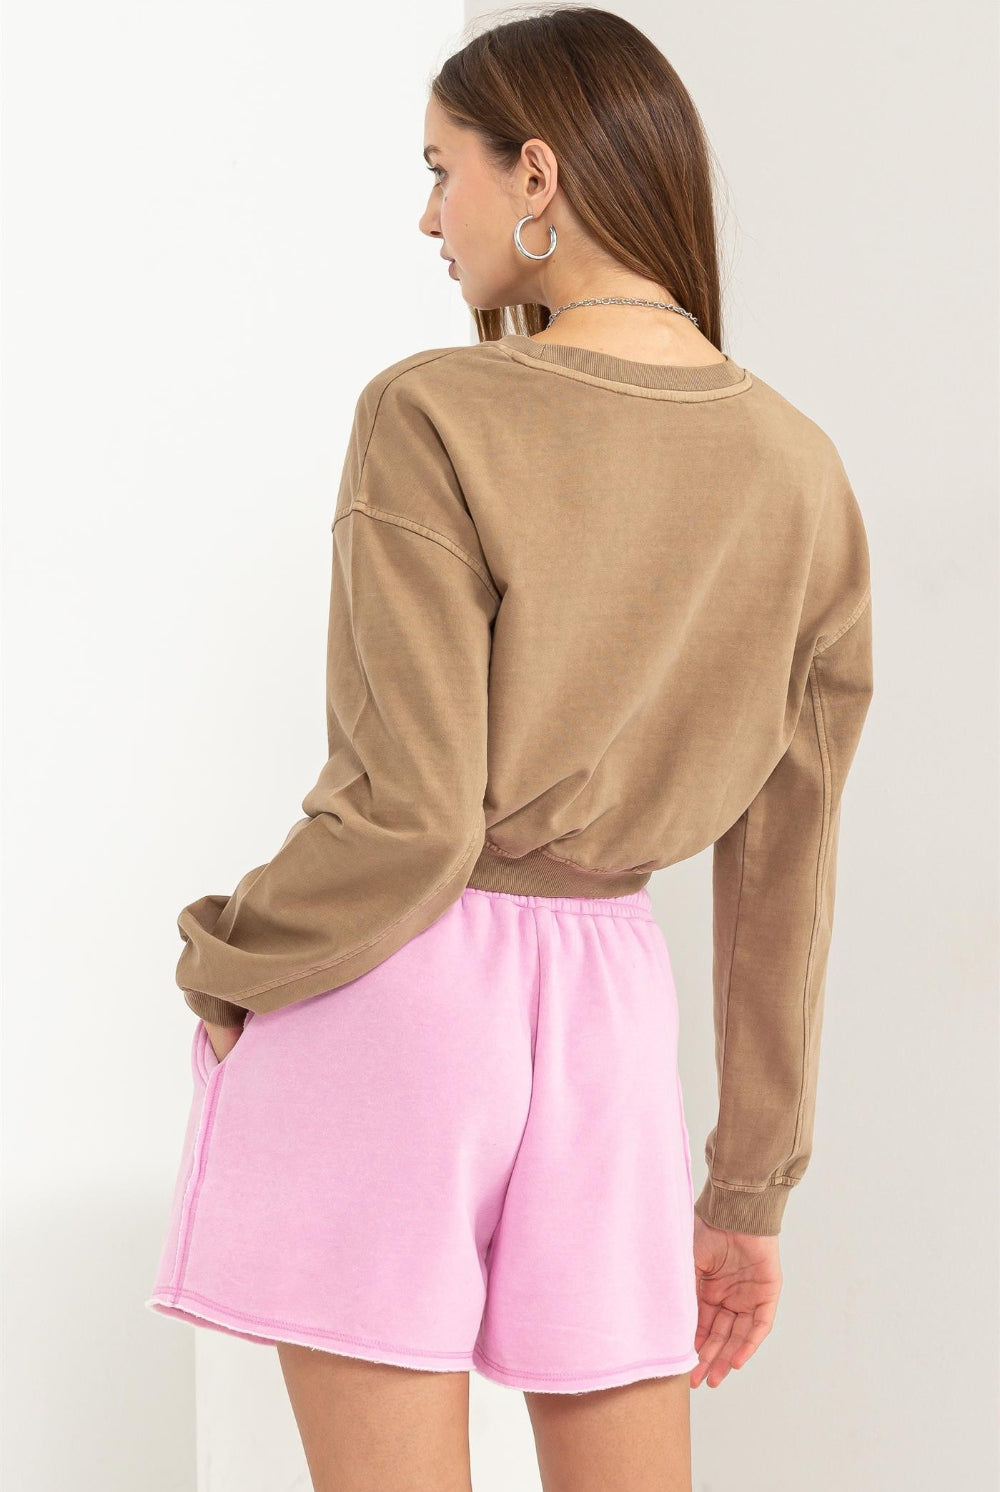 A woman modeling a HYFVE round neck long sleeve cropped sweatshirt in a solid khaki color. The sweatshirt has a raw hemline and drop shoulders, giving off a relaxed and trendy vibe. She is also wearing pink drawstring shorts, complementing the casual look.